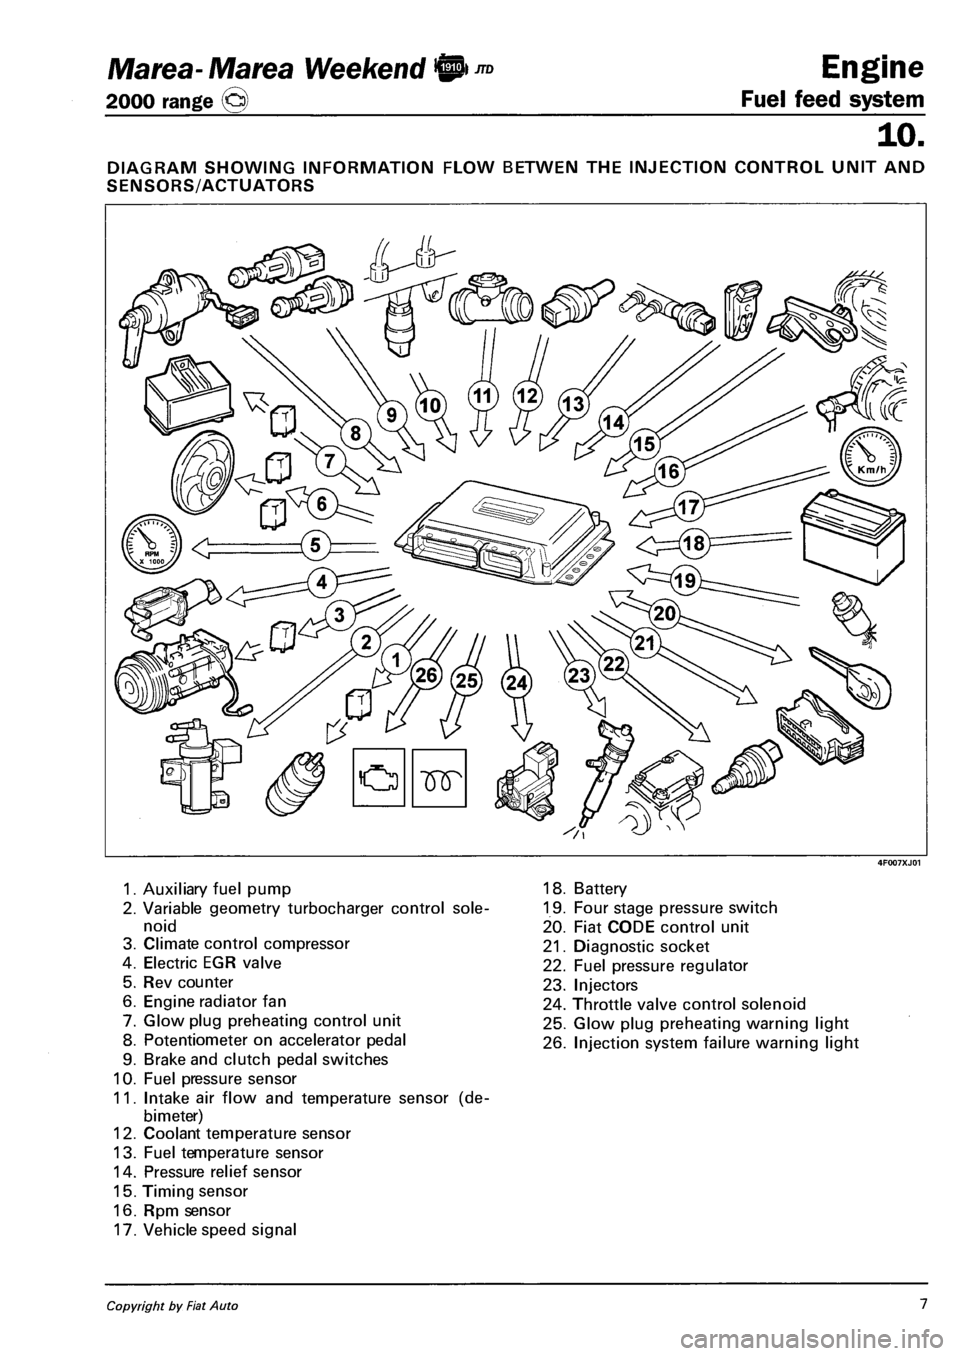 FIAT MAREA 2001 1.G User Guide Marea- Marea Weekend 9 ™ 
2000 range © 
Engine 
Fuel feed system 
10. 
DIAGRAM SHOWING INFORMATION FLOW BETWEN THE INJECTION CONTROL UNIT AND 
SENSORS/ACTUATORS 
1. Auxiliary fuel pump 
2. Variable